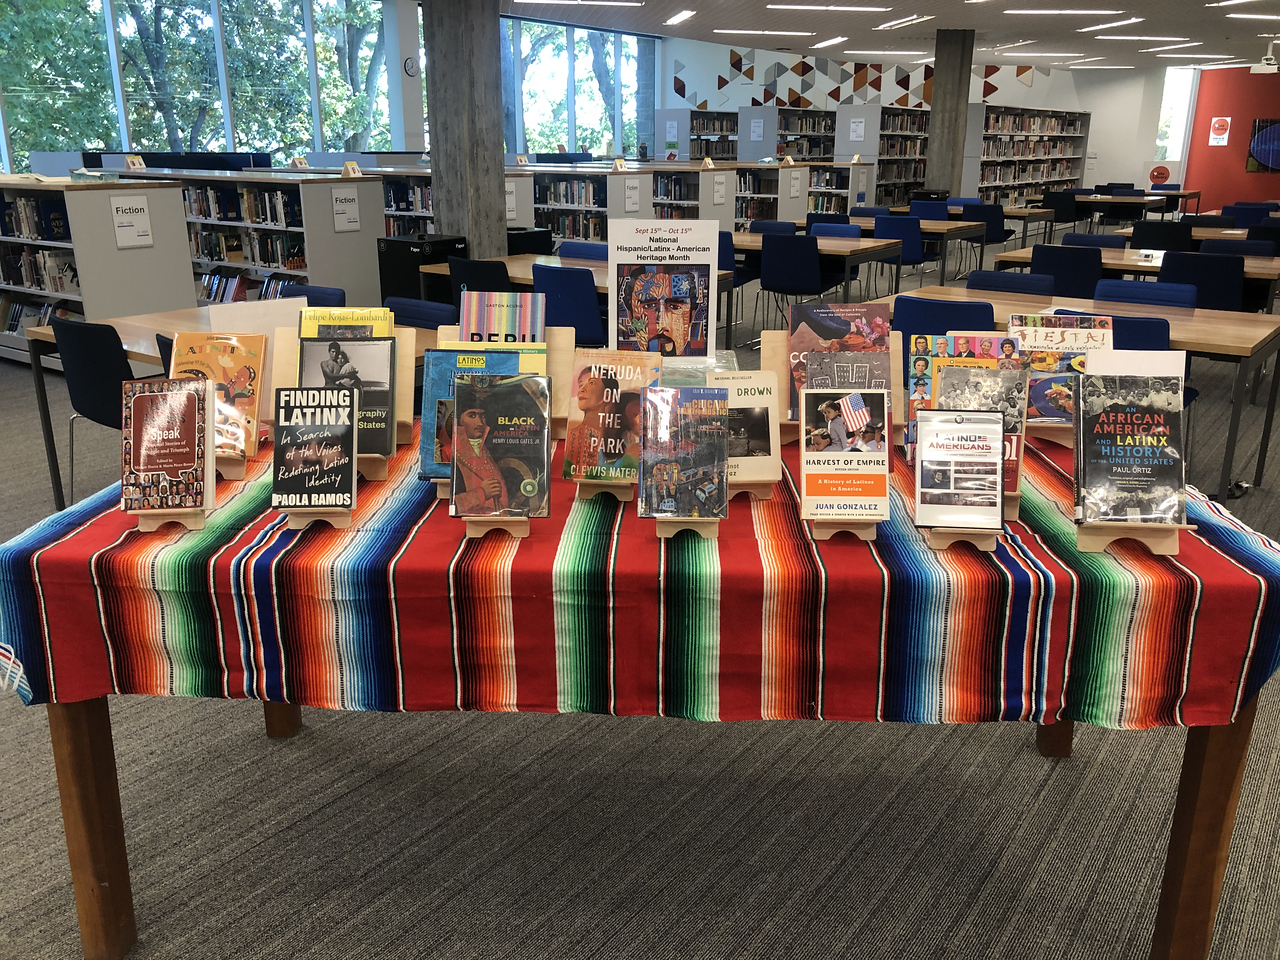 Display table in the Tate Library at ECFS displays books by Latinx authors.